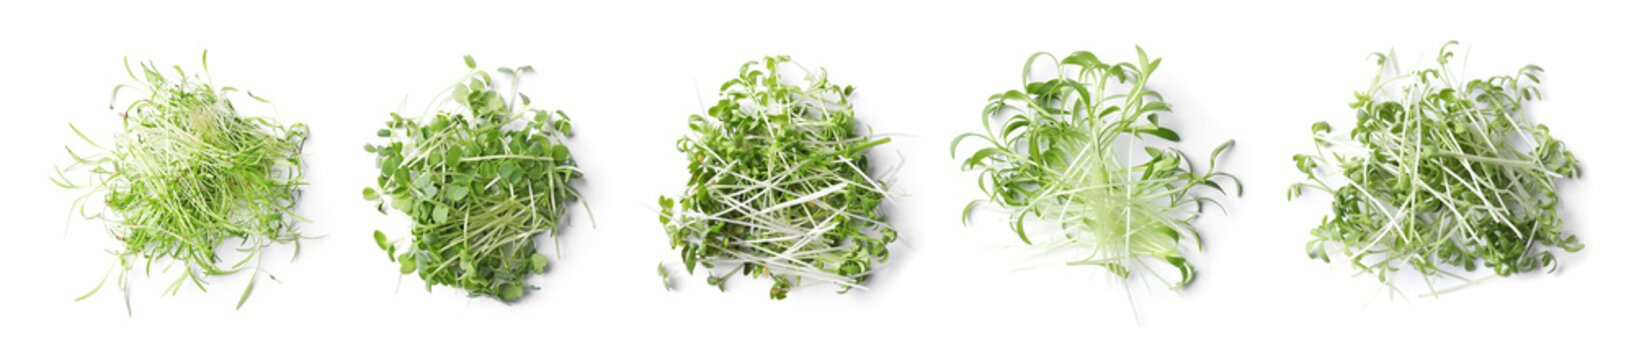 Set of different fresh microgreens on white background, top view. Banner design